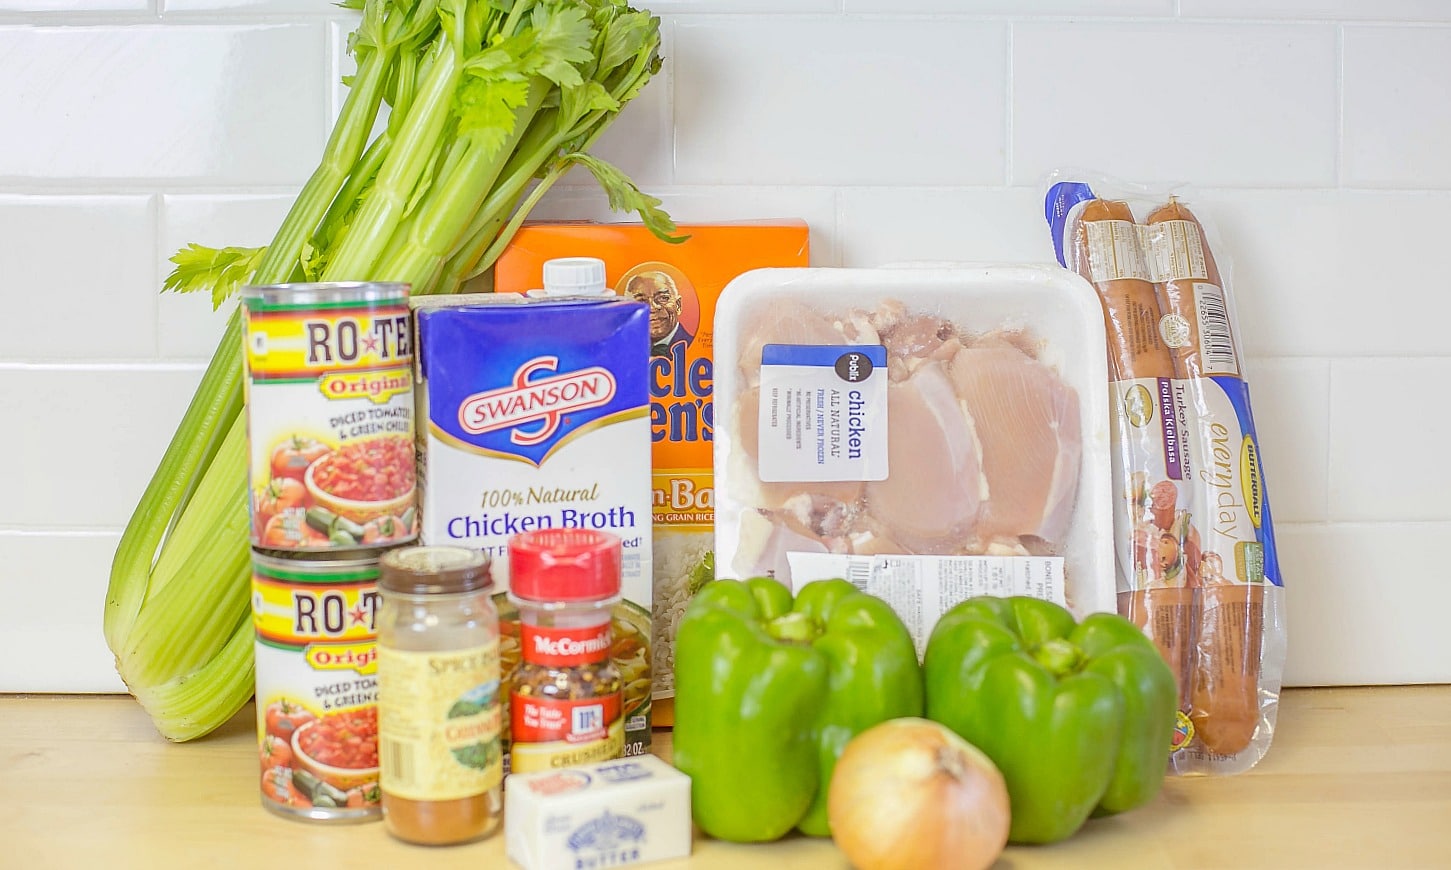 Assemble the jambalaya ingredients: chicken, sausage, celery, tomatoes, peppers, onions, rice and seasonings. 